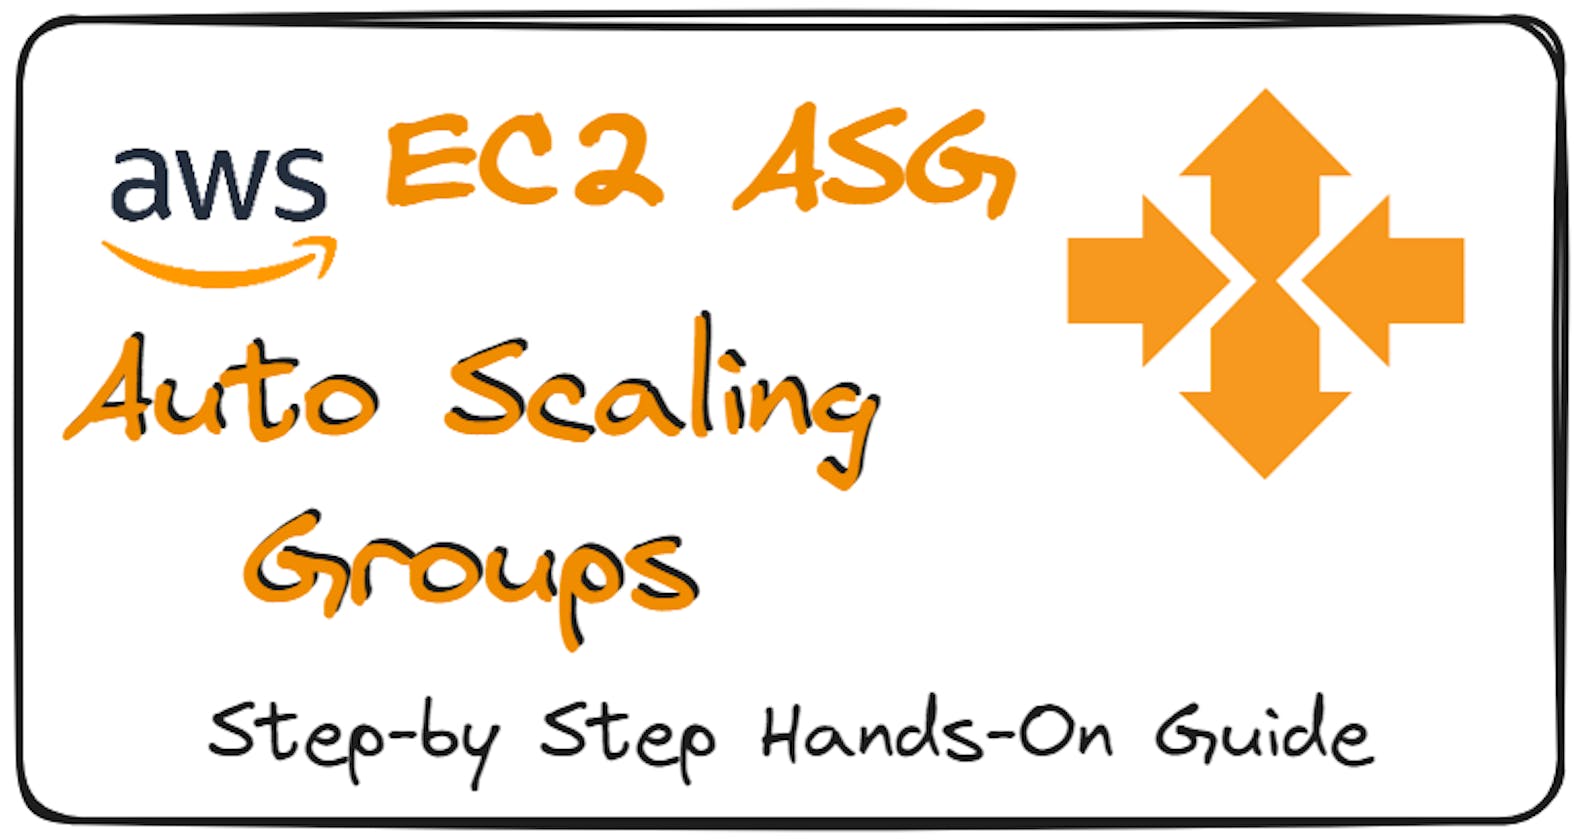 AWS EC2 ASG Hands-On | A Step-by-Step Guide